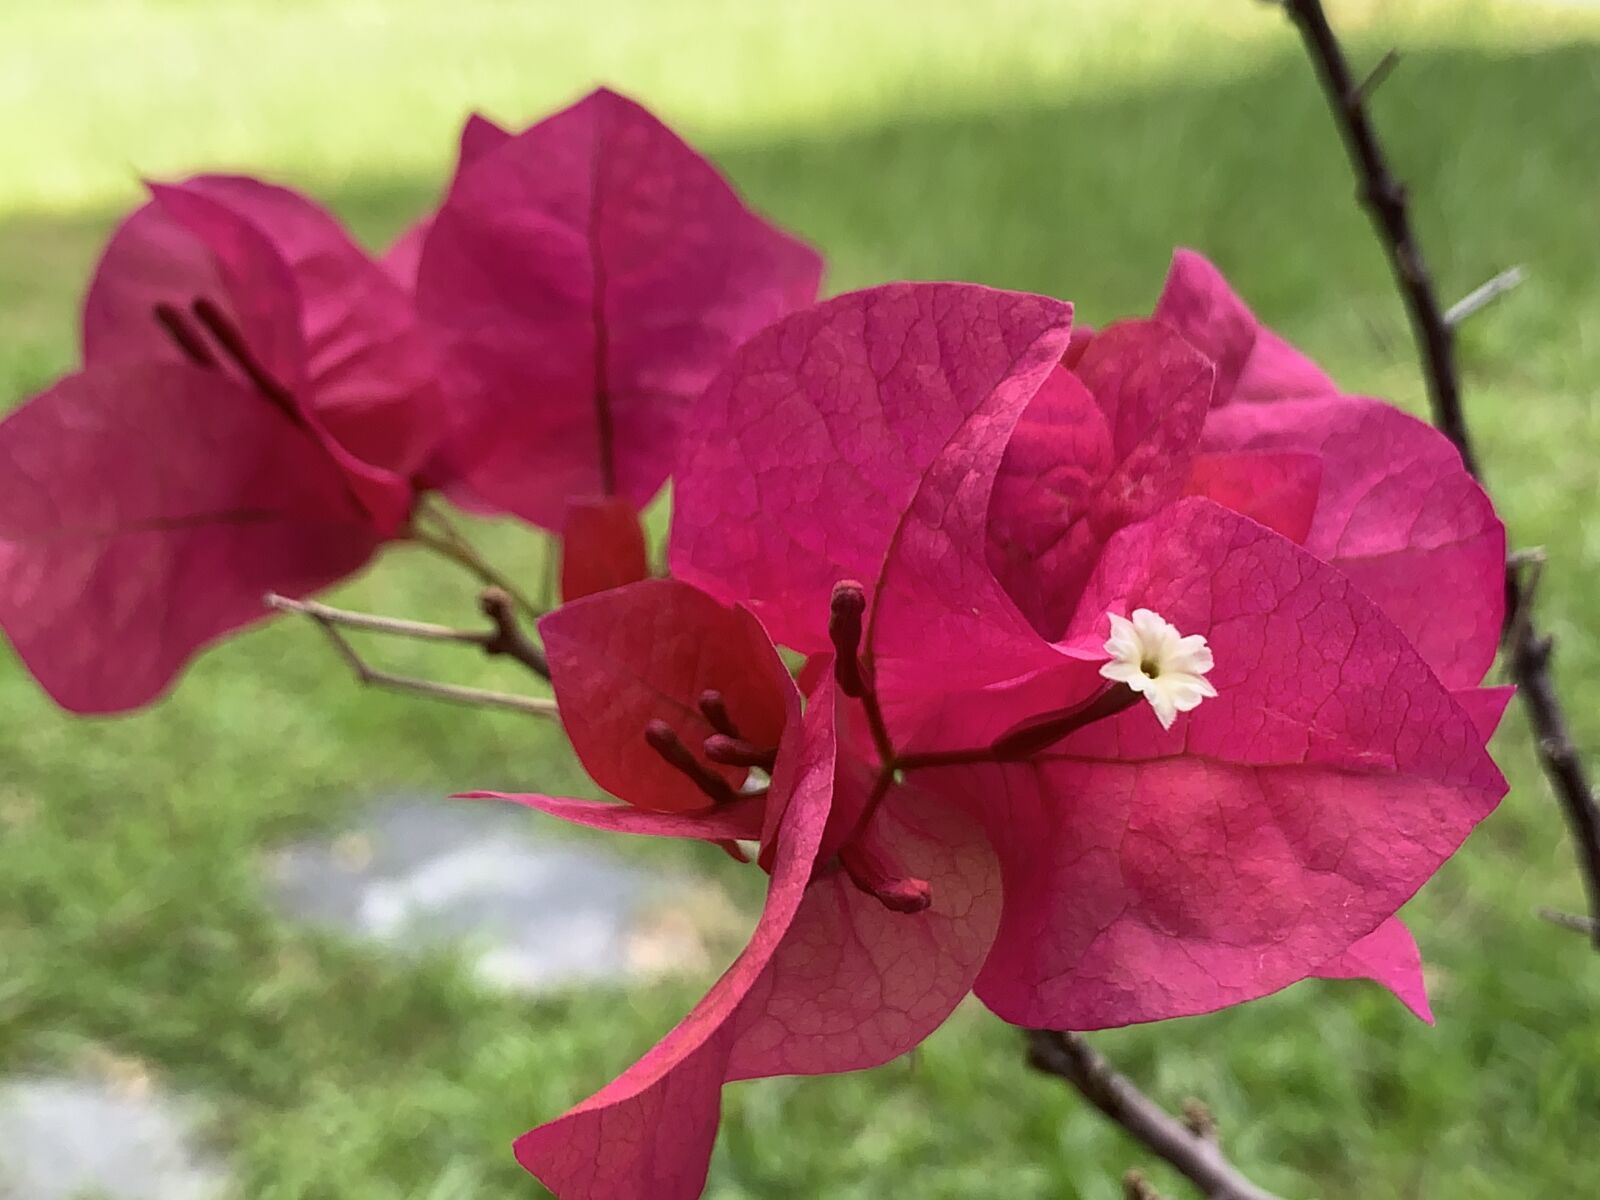 Apple iPhone XS Max + iPhone XS Max back dual camera 4.25mm f/1.8 sample photo. Bougainvillea, flower, plant photography